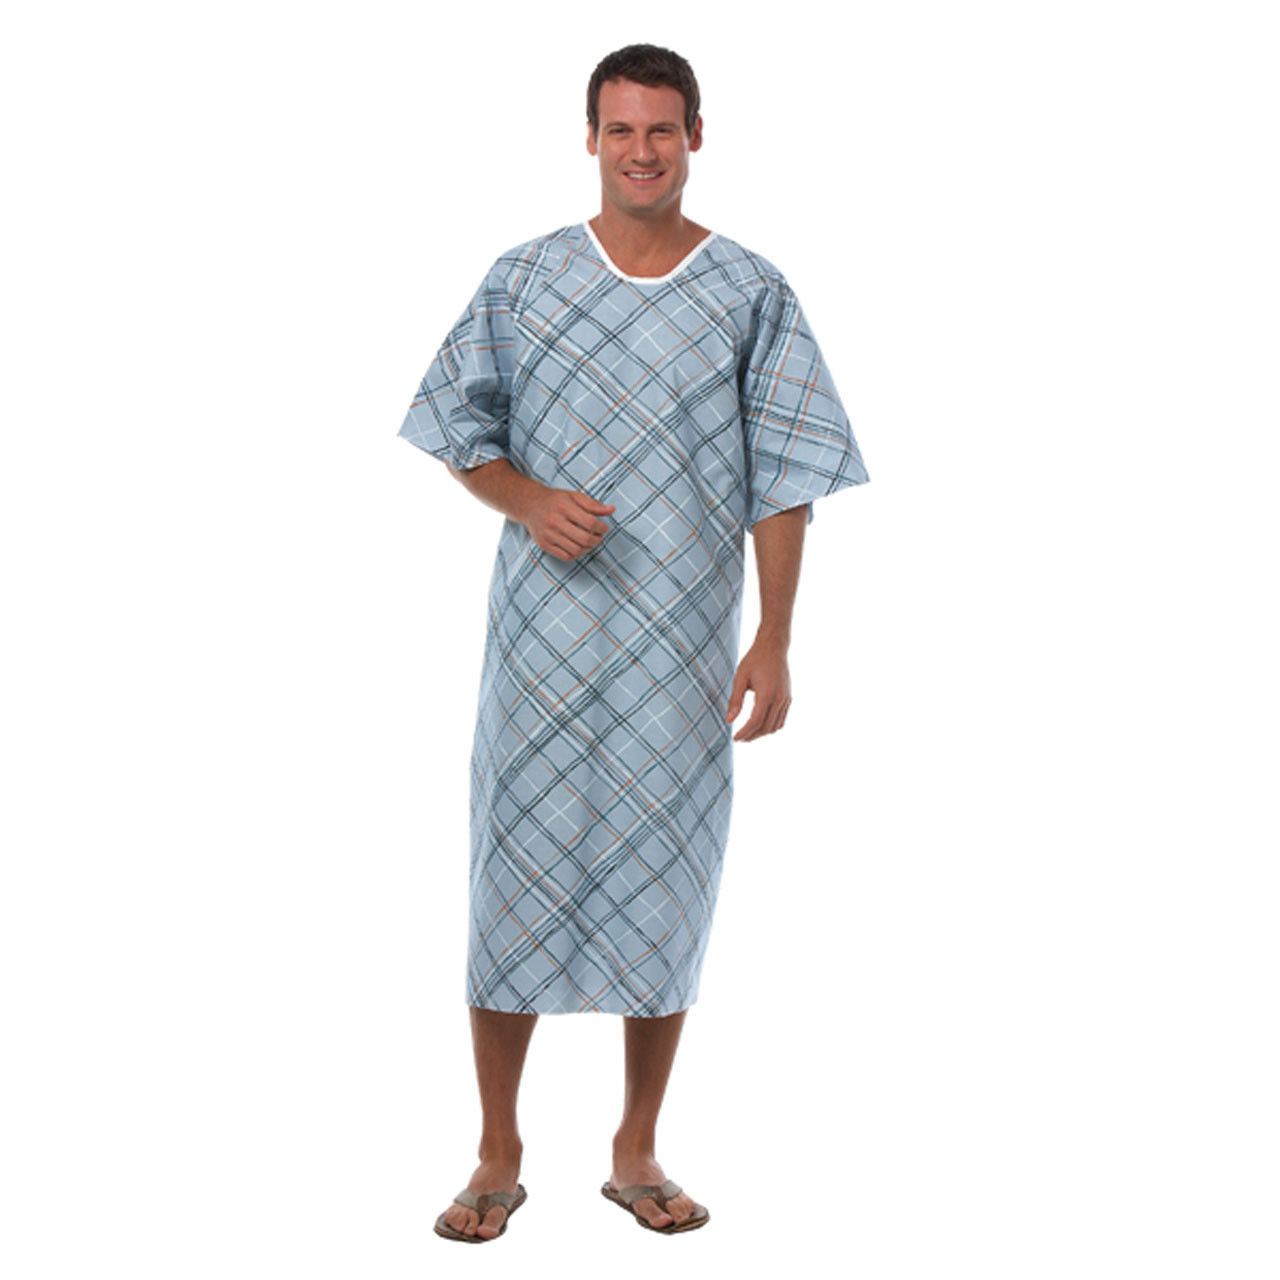 How is the hospital gown secured on the patient?